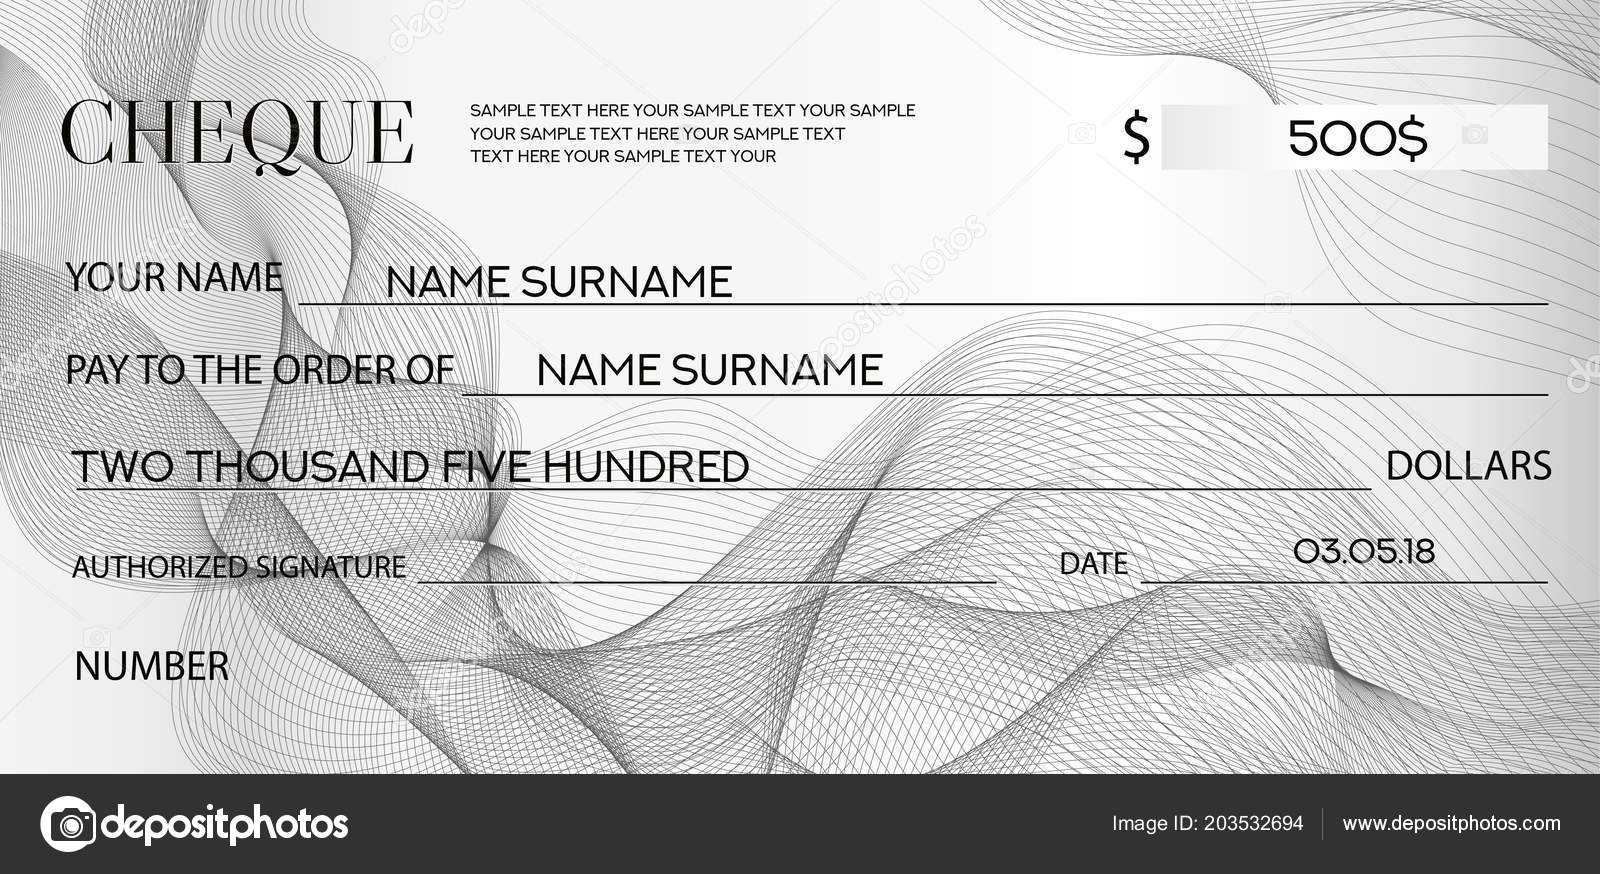 Blank Check Sample Image | Cheque Check Template Chequebook In Blank Business Check Template Word